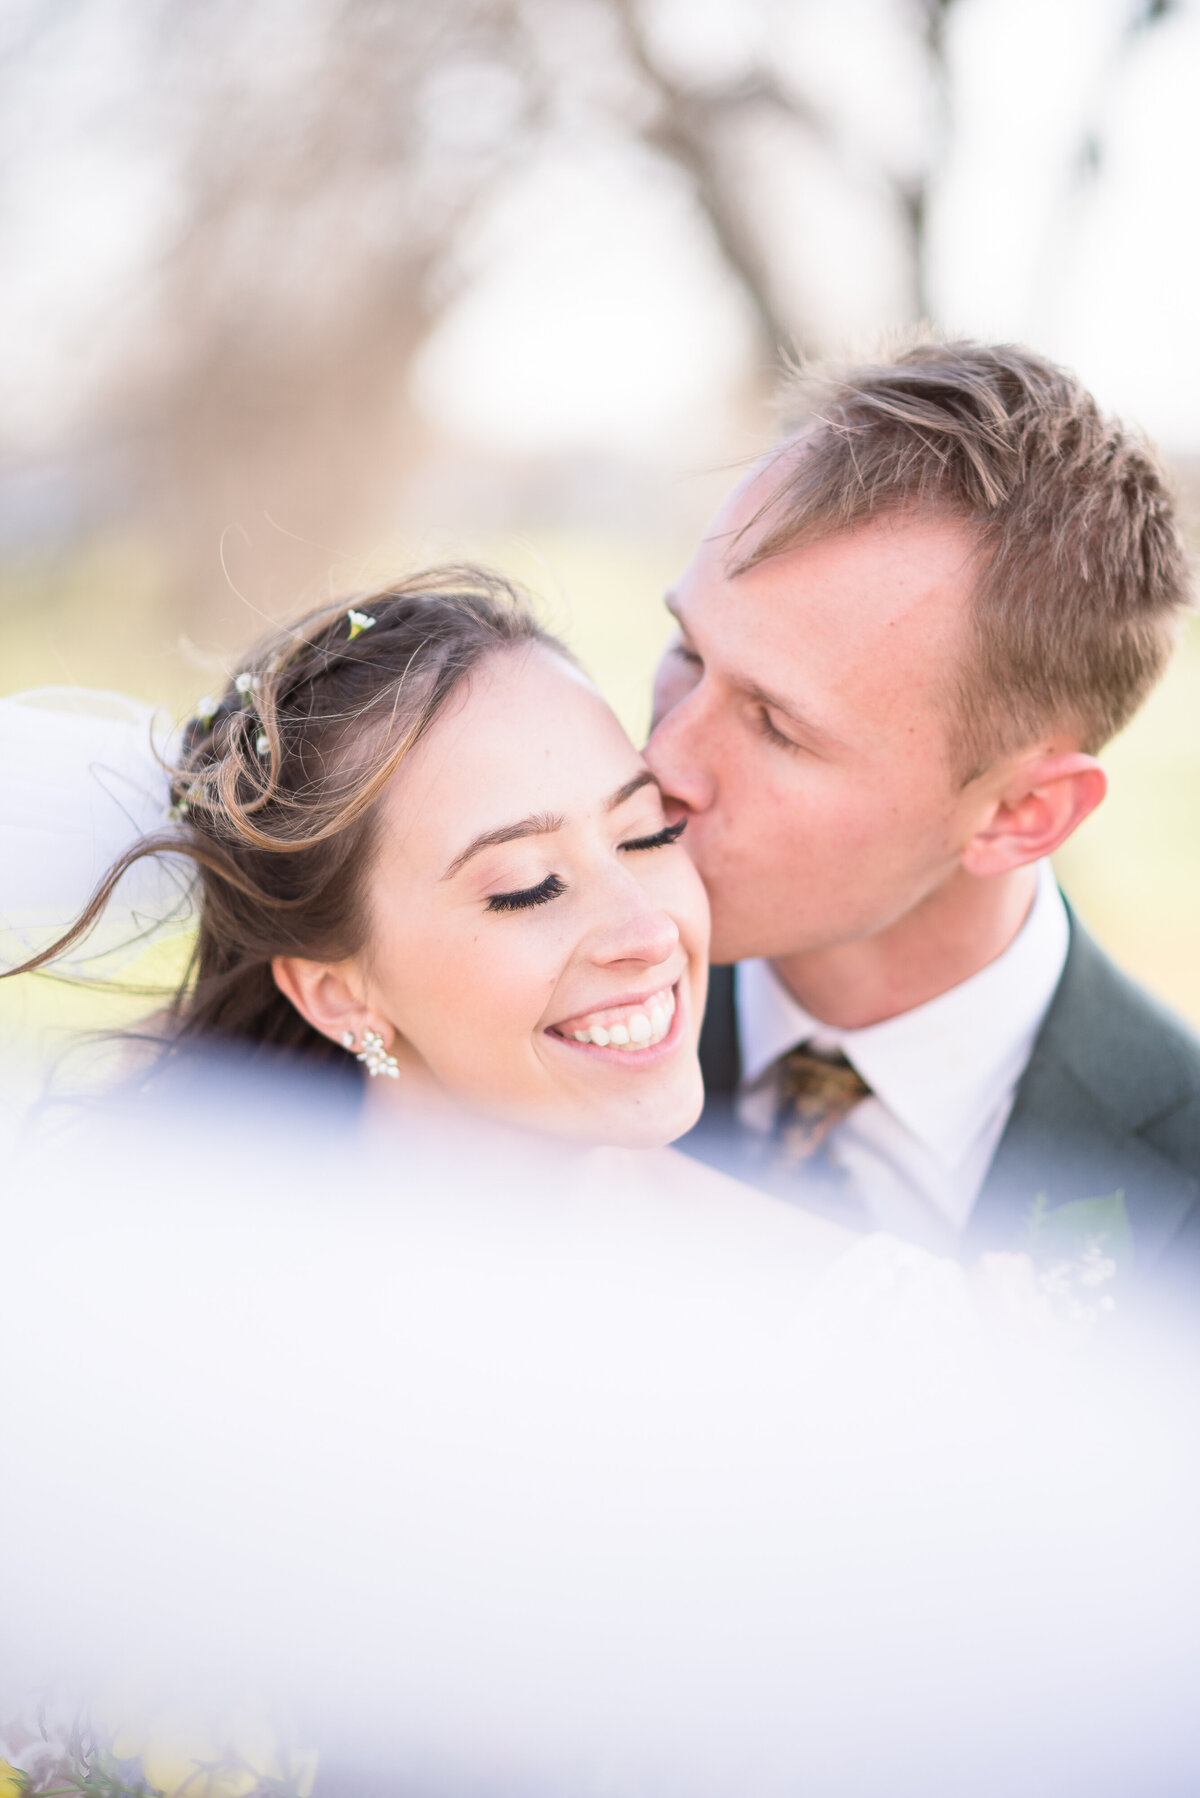 denver wedding photographer captures groom kissing his brides cheek as she smiles with her eyes closed and her veil blows in front of them